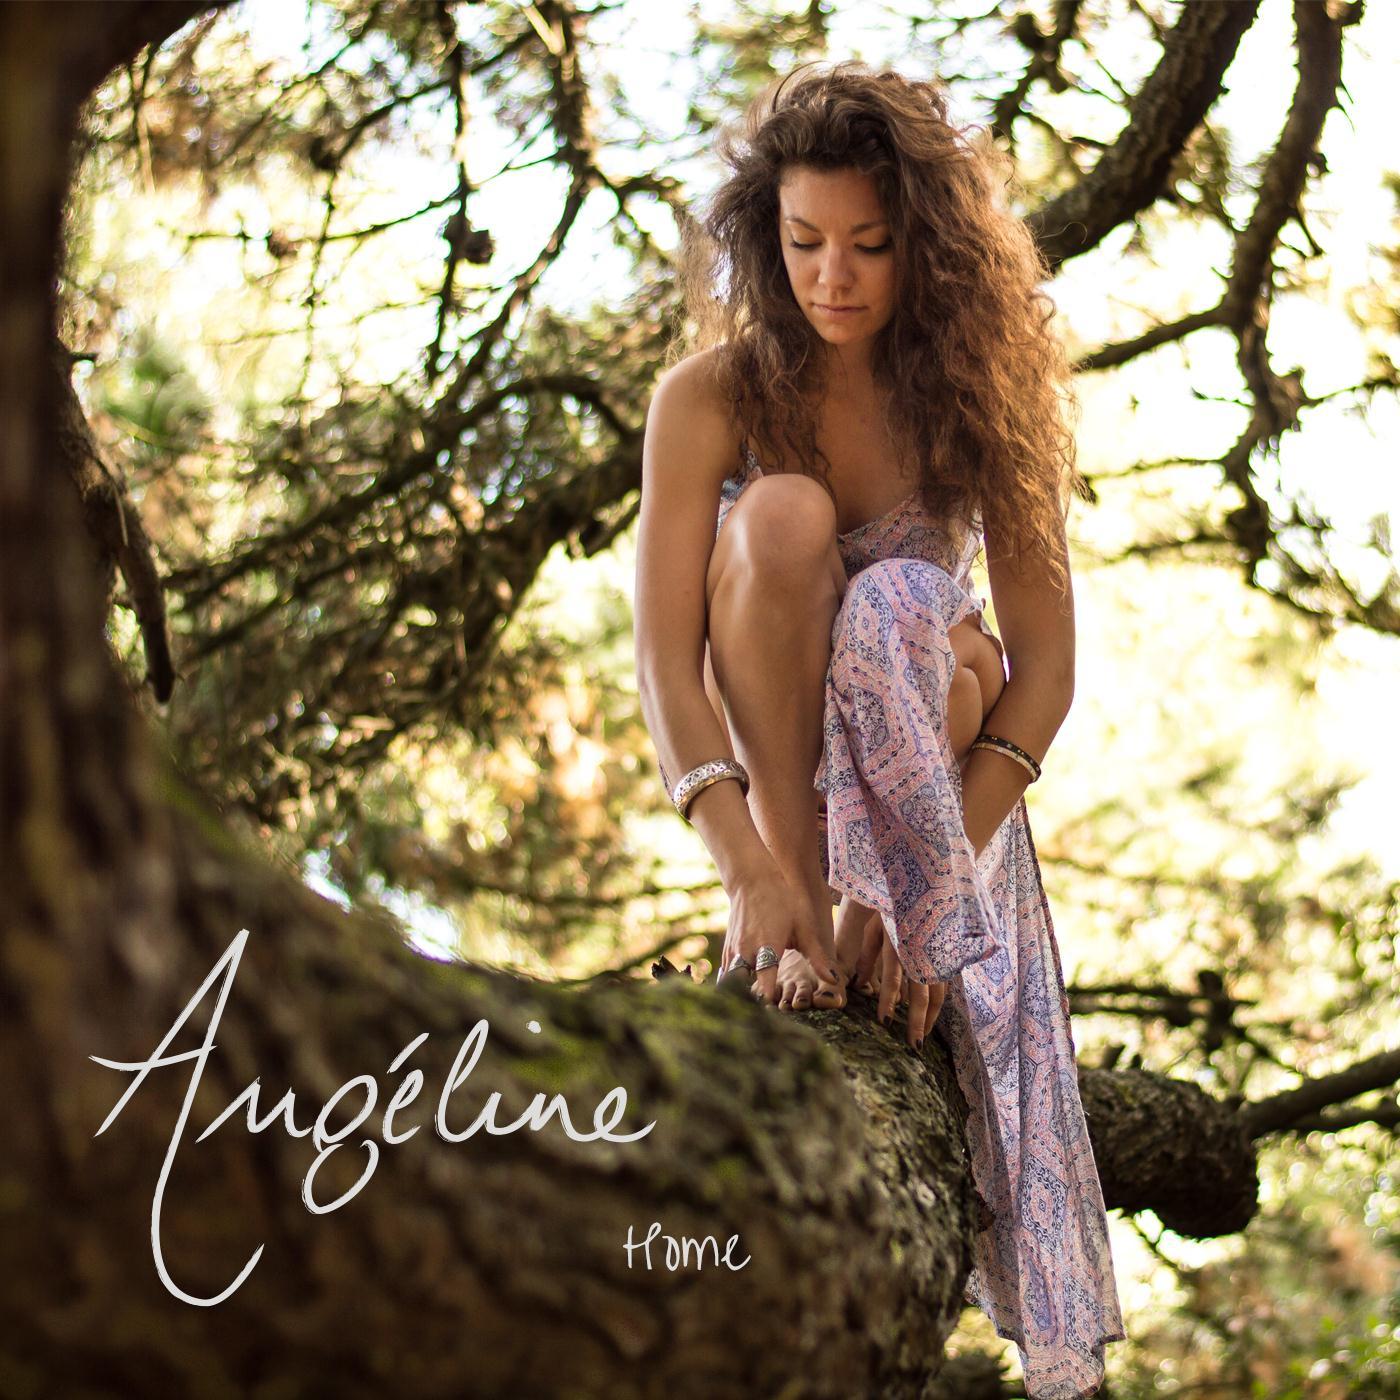 Angeline - Lonely and Blue